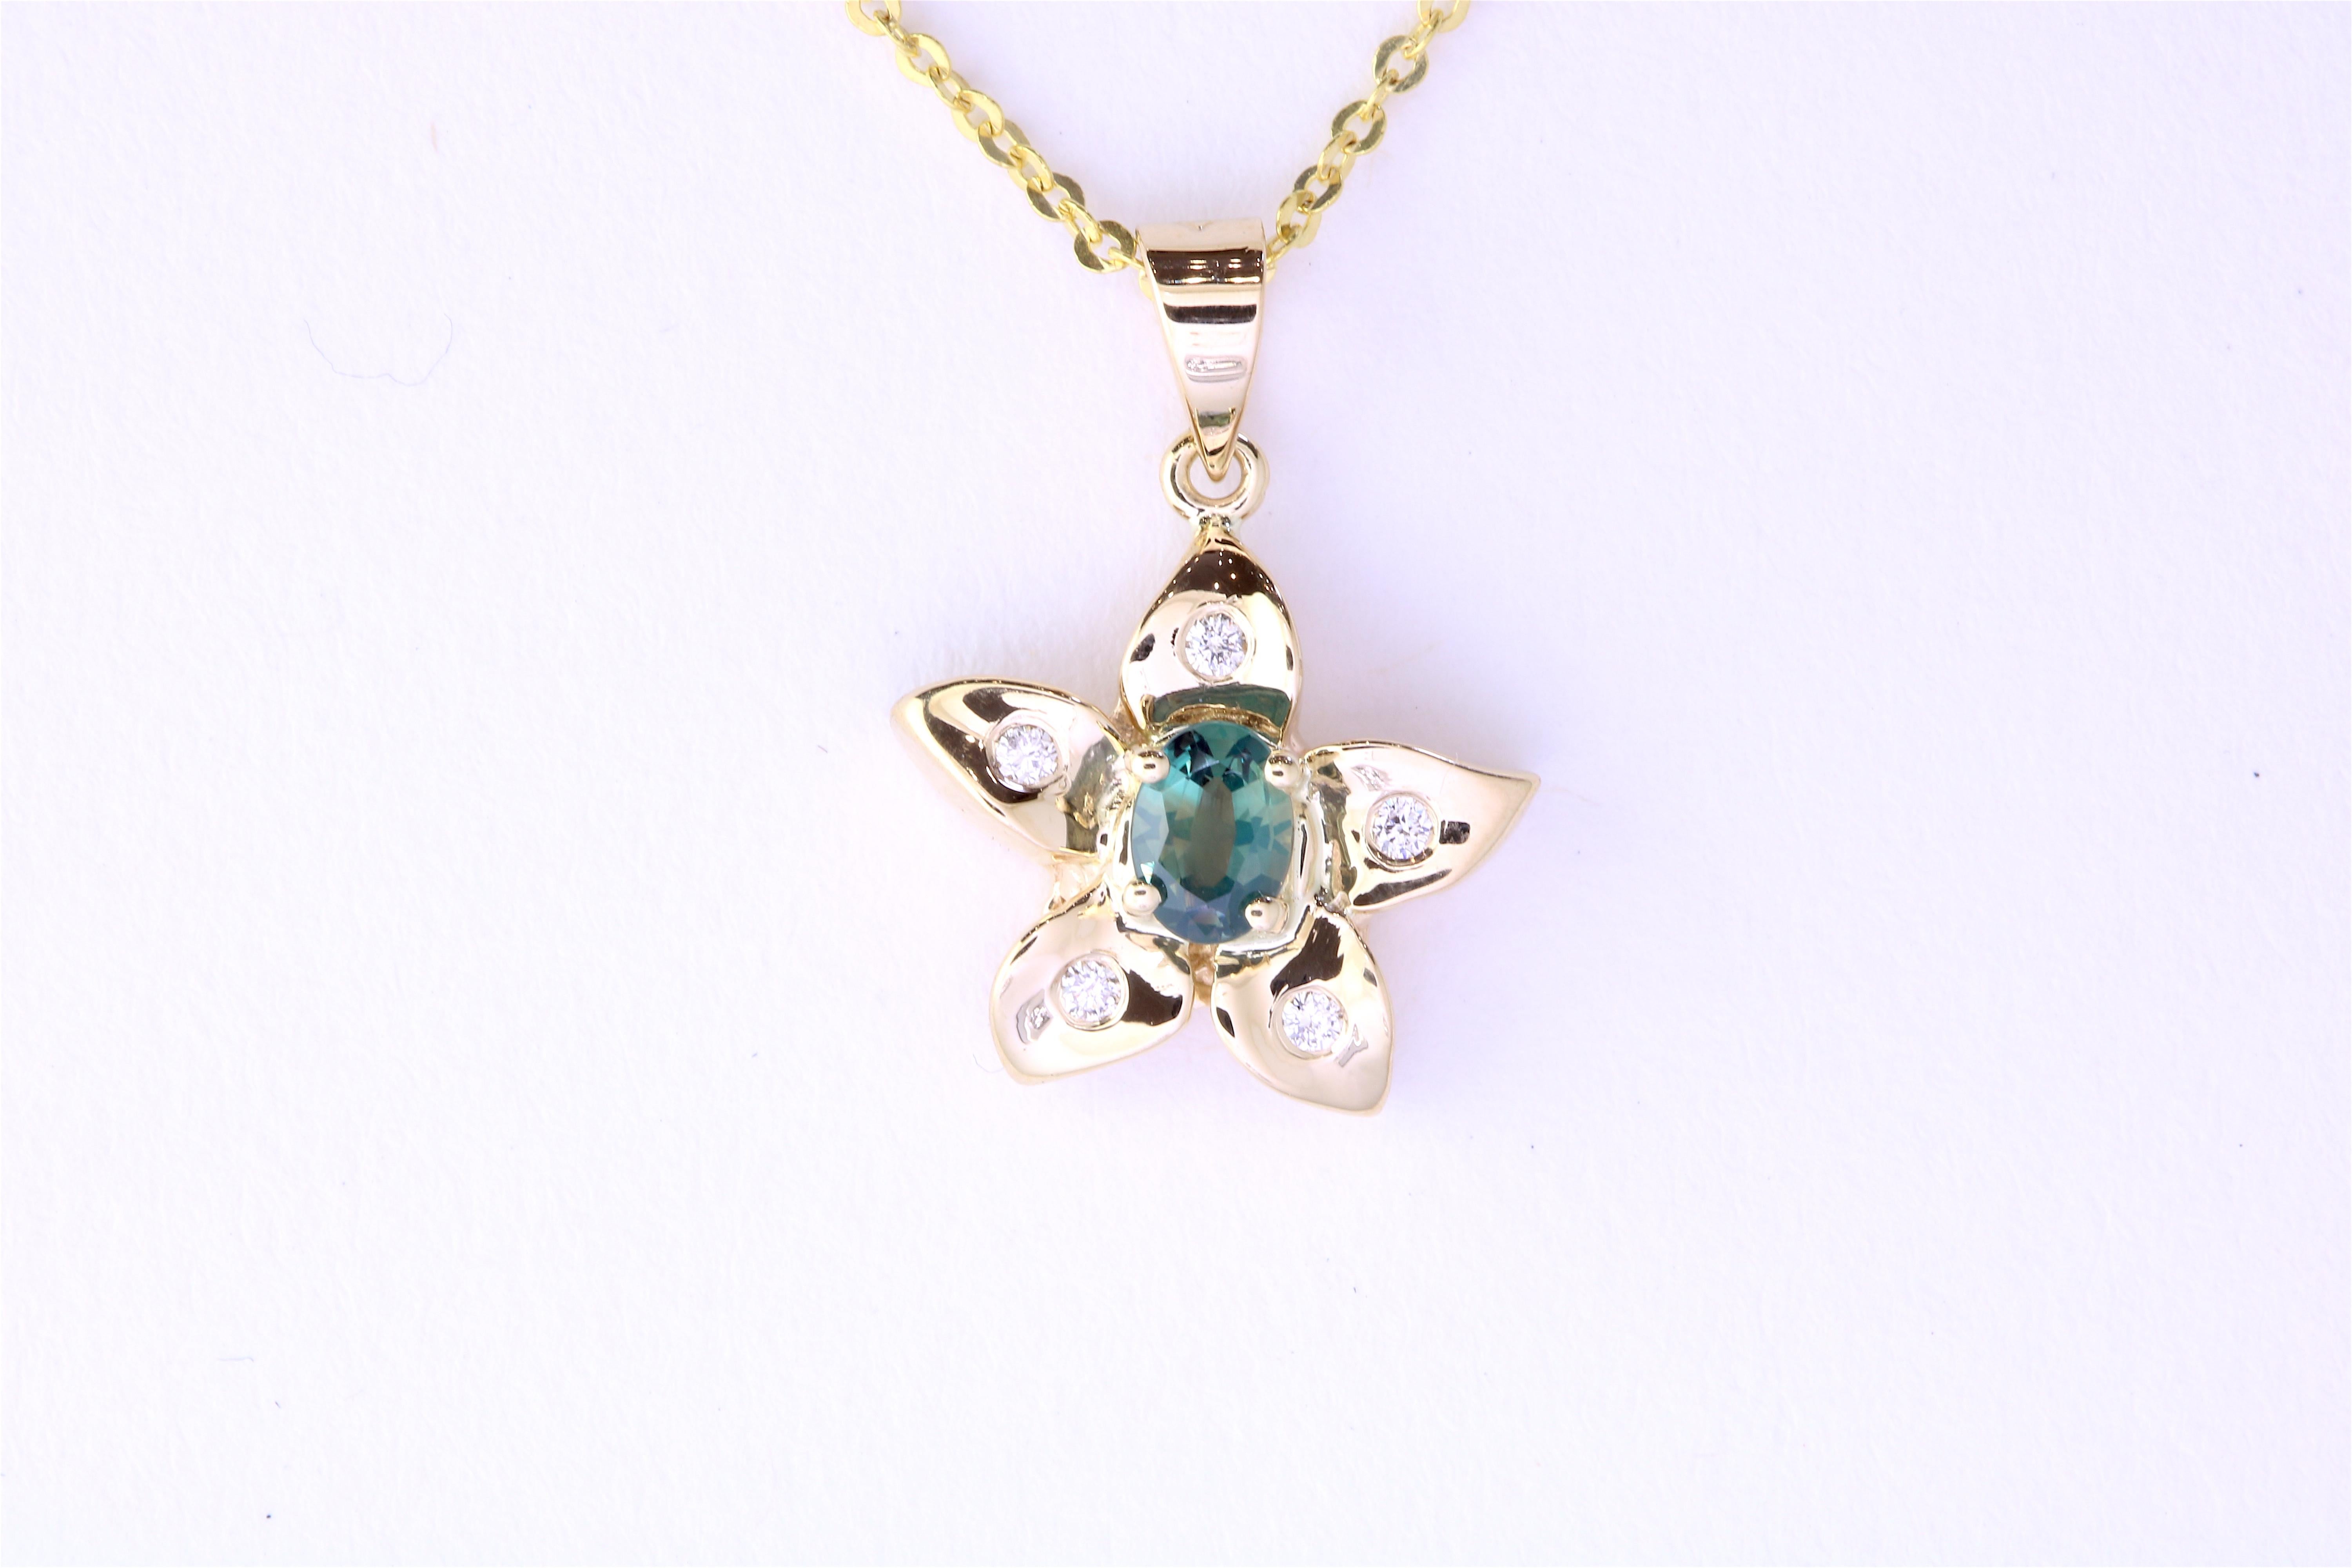 Material: 14k Yellow Gold 
Center Stone Details: 0.22 Carat Oval Natural Color Changing Alexandrite - 4.5 x 3.4 mm
Mounting Diamond Details: 5 Round White Diamonds Approximately 0.03 Carats - Clarity: SI / Color: H-I
Chain: 18 inch

Match this with